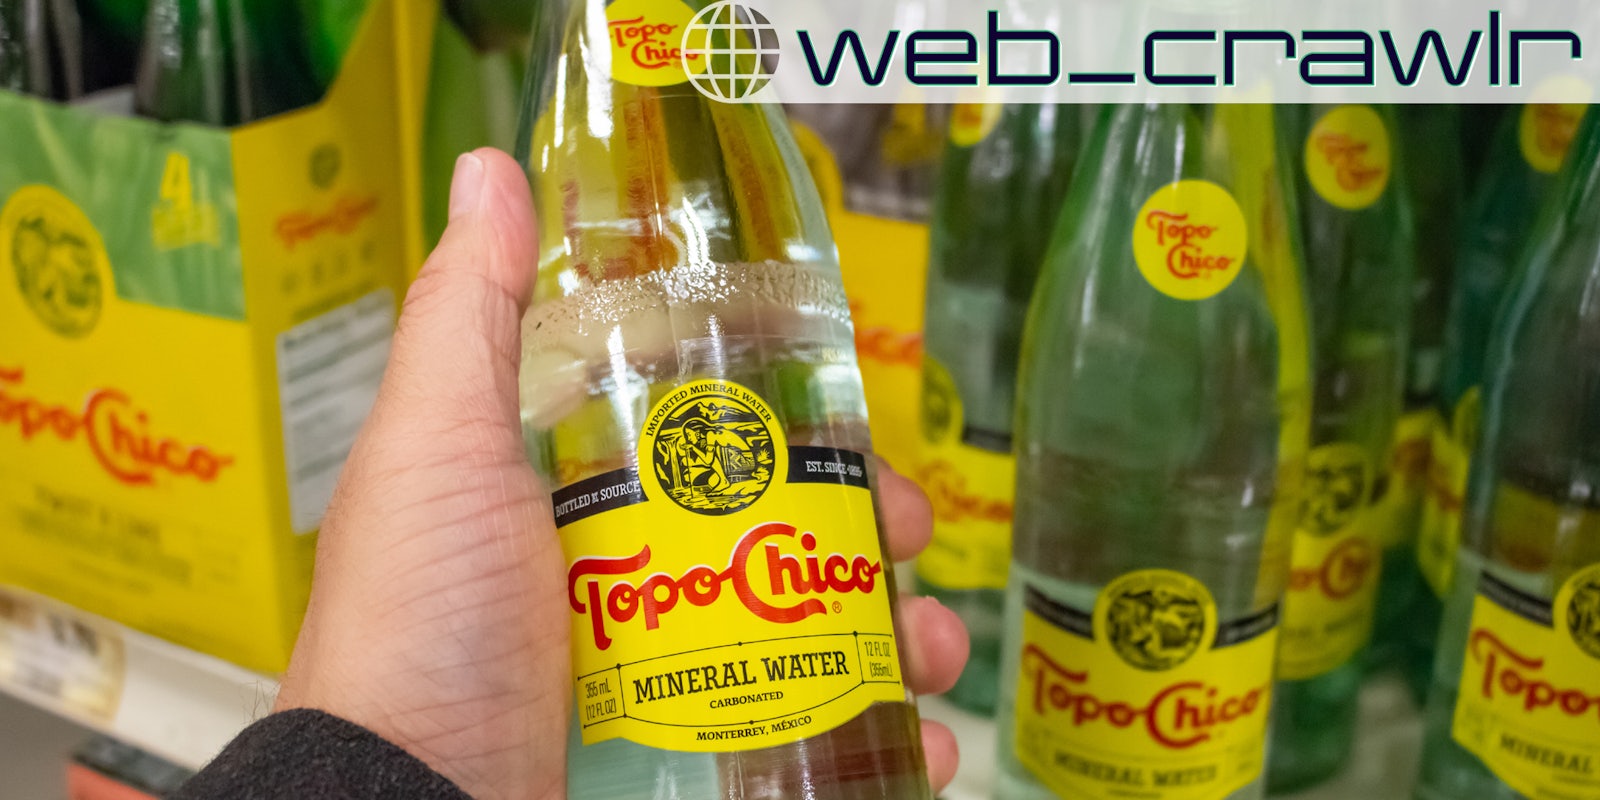 A bottle of Topo Chico. The Daily Dot newsletter web_crawlr logo is in the top right corner.